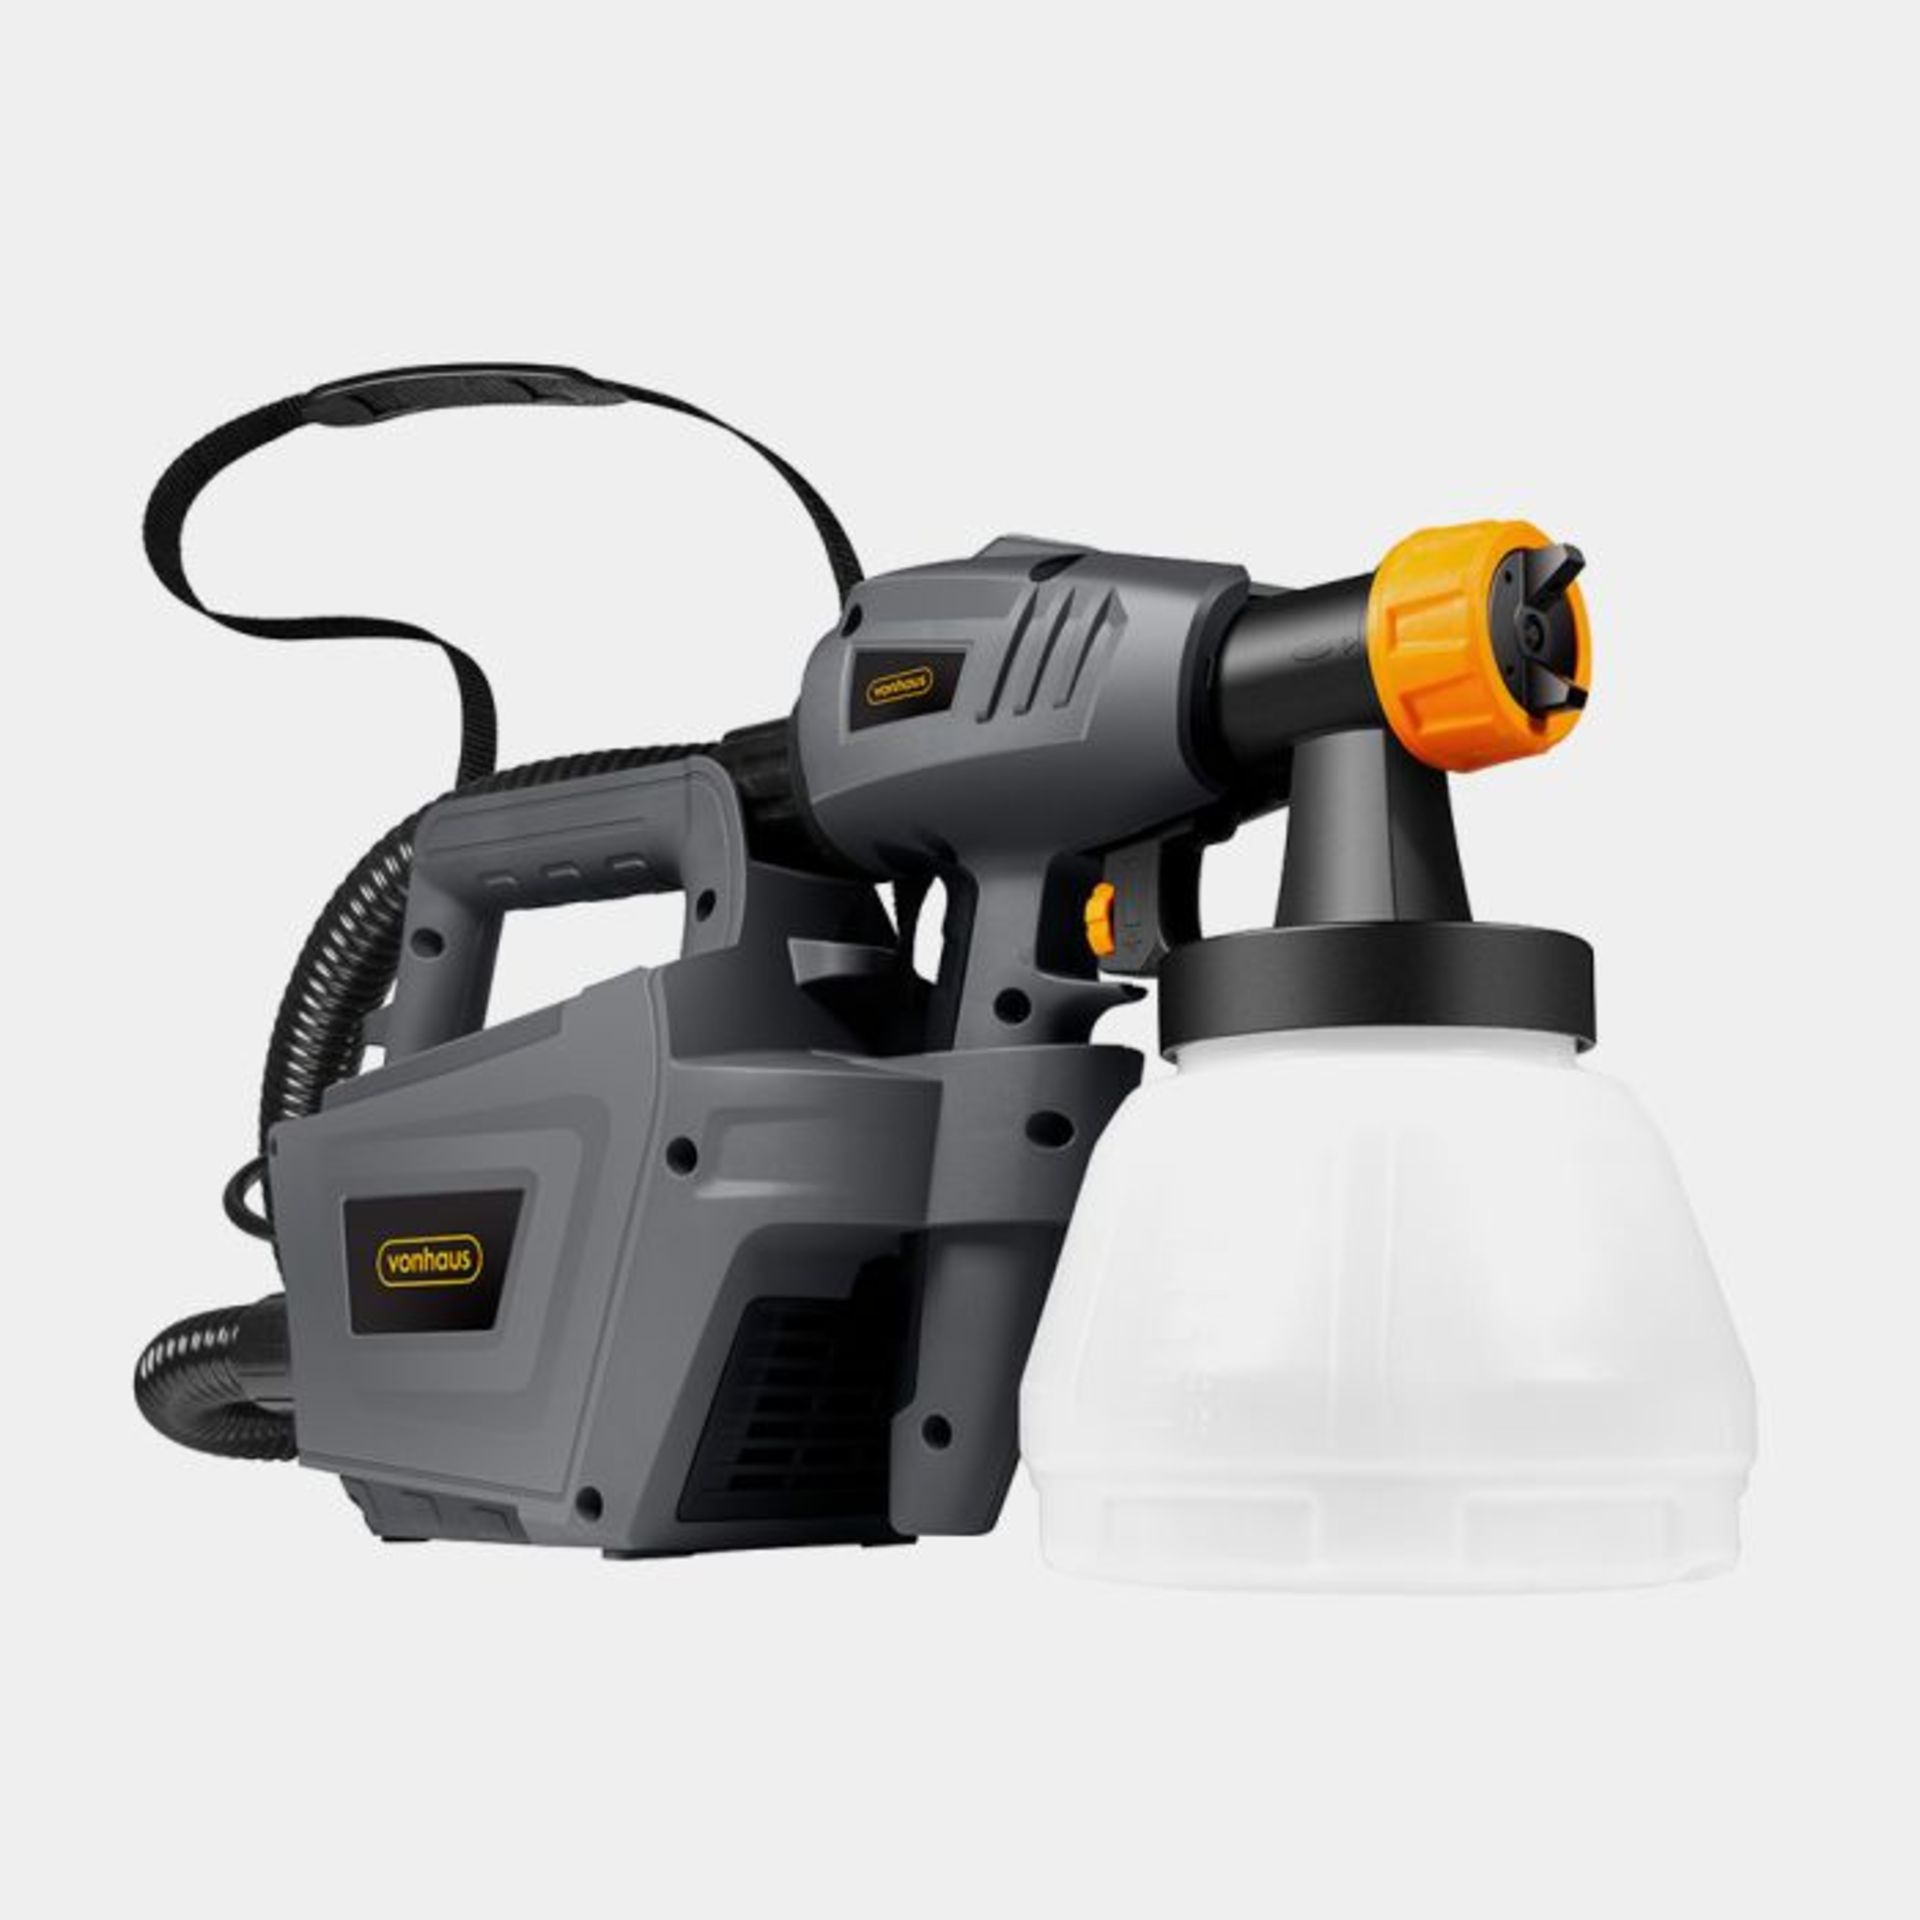 800W Paint Sprayer. - ER35. Suitable for indoor and outdoor use, as well as for all kinds of